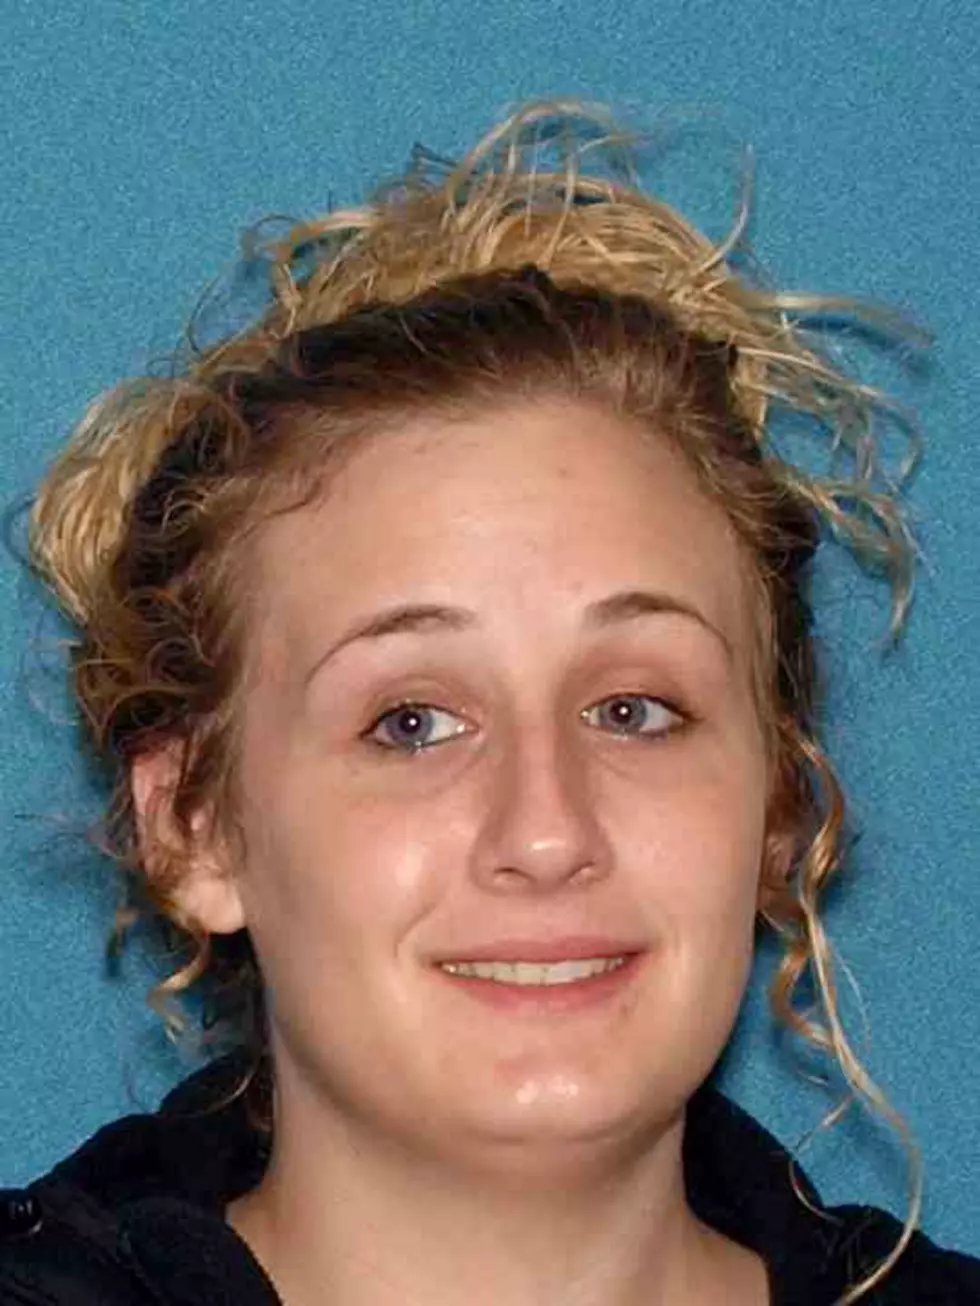 Ocean Gate woman charged with dealing crack-cocaine